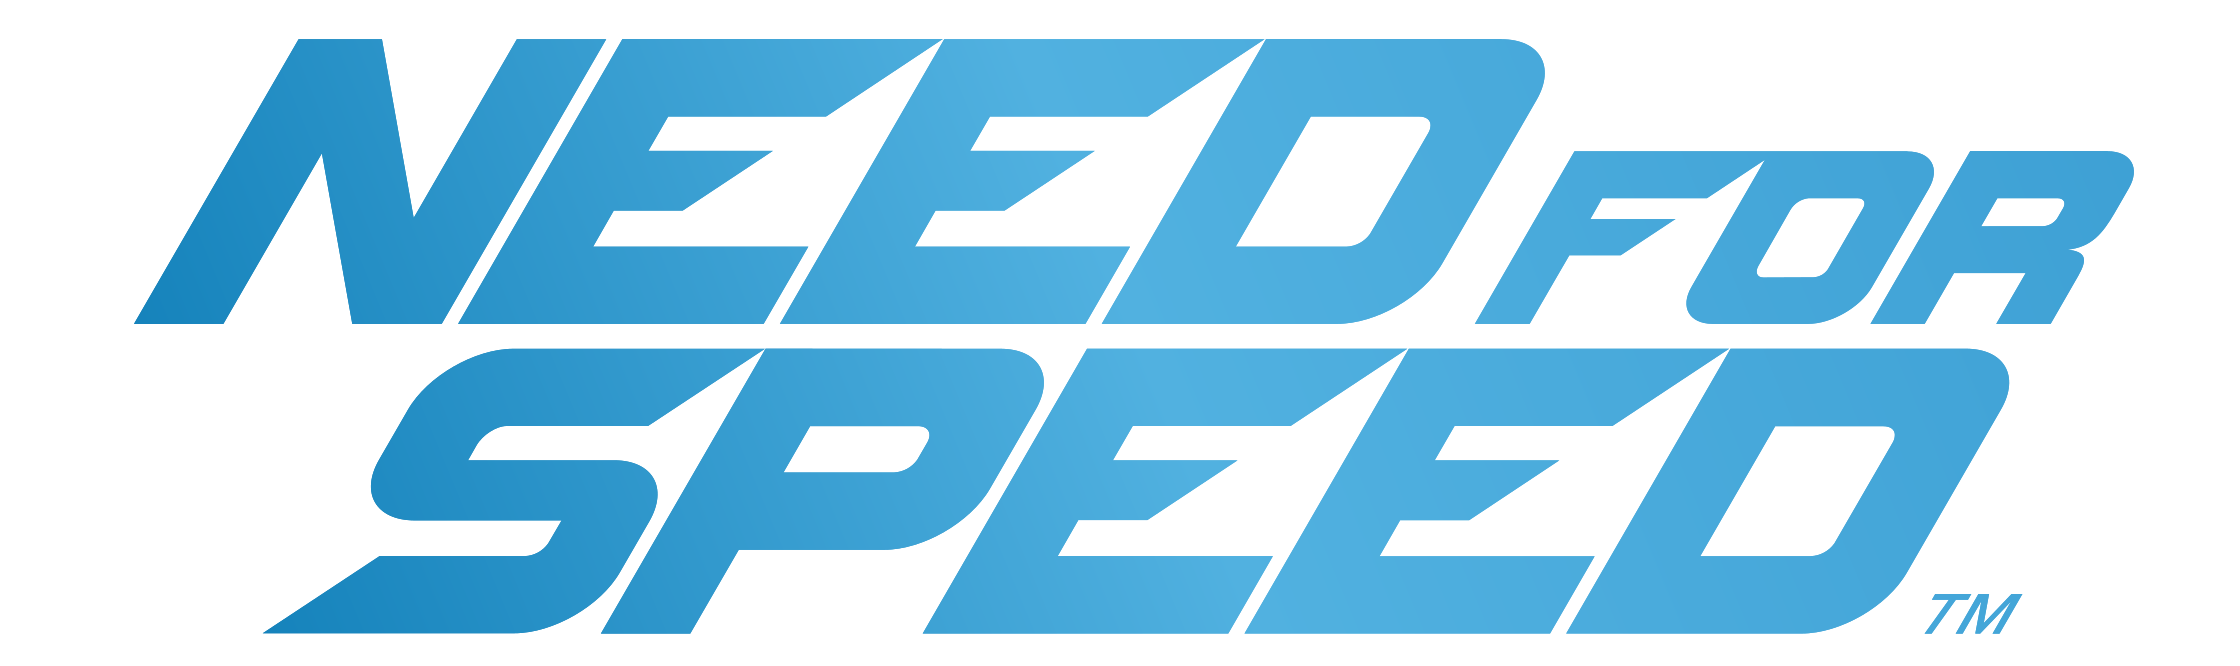 Need For Speed PNG Image pngteam.com